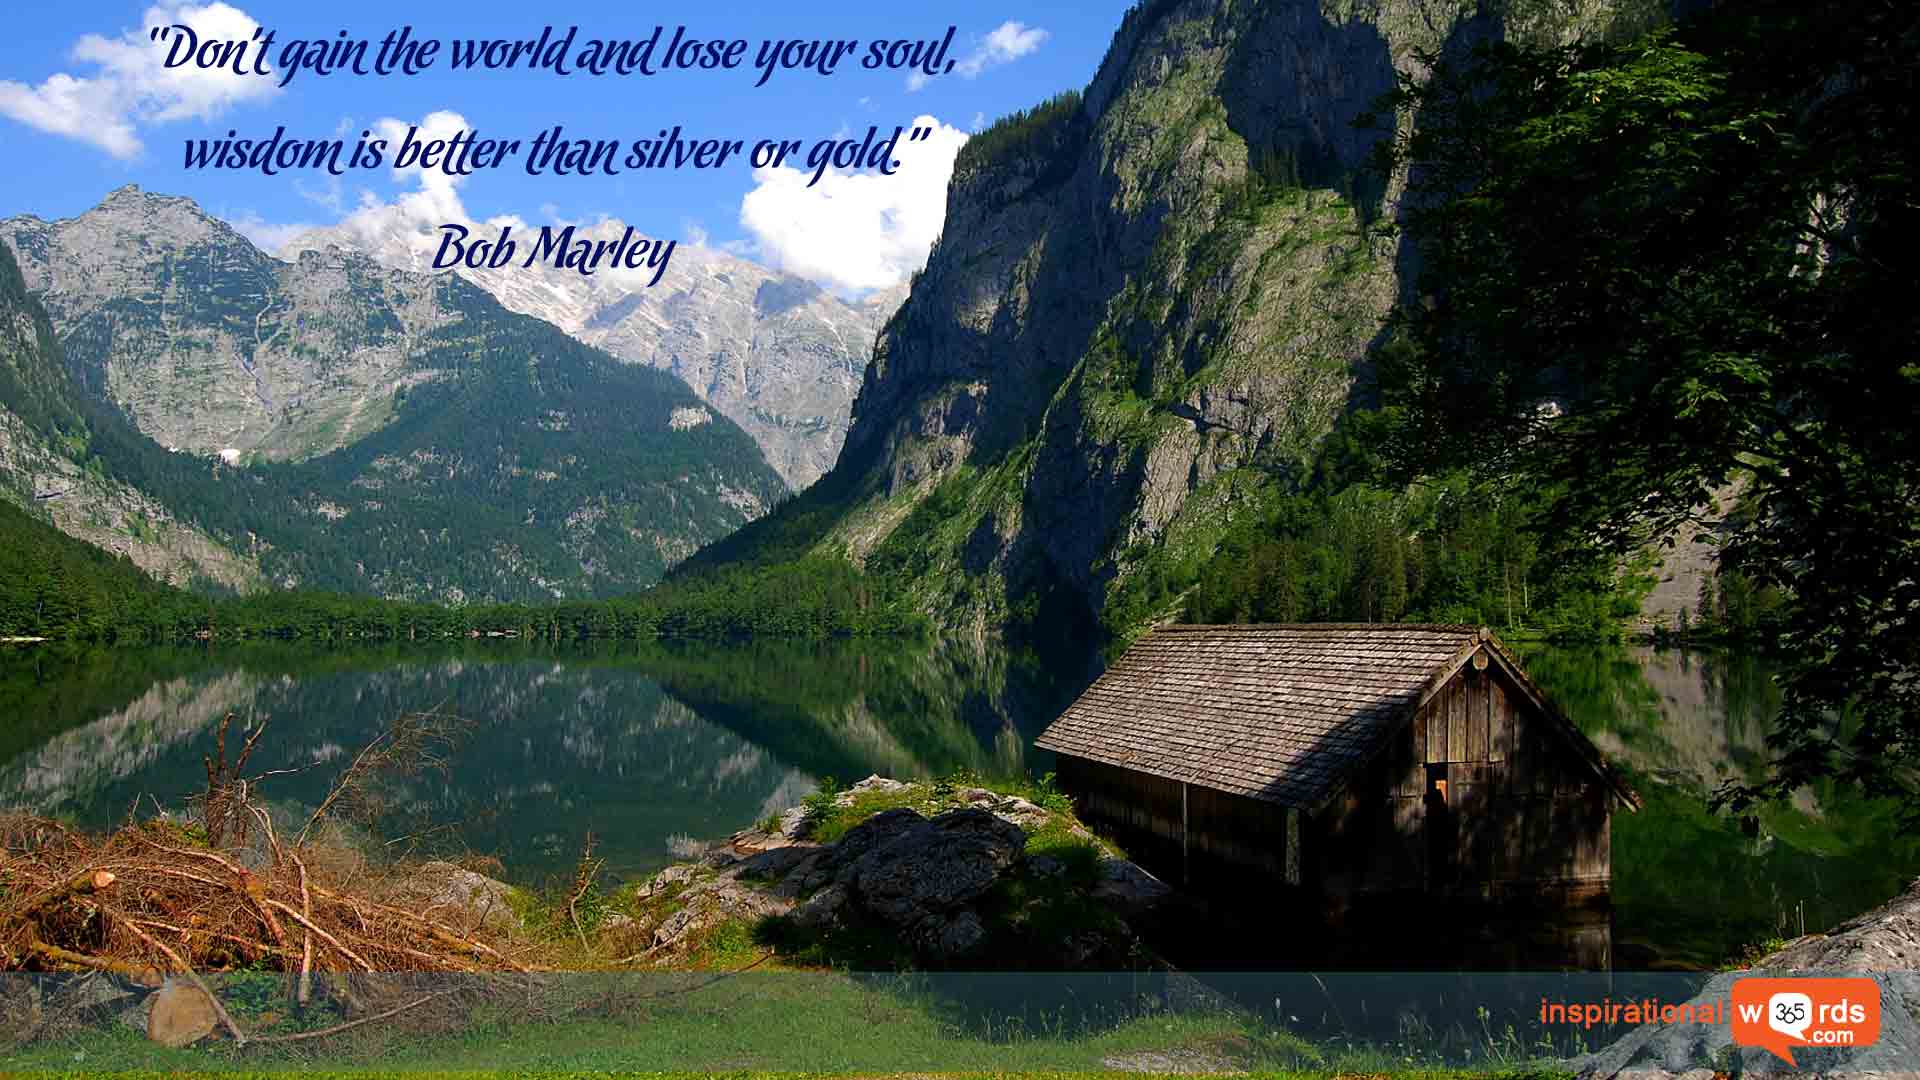 Inspirational Wallpaper Quote by Bob Marley